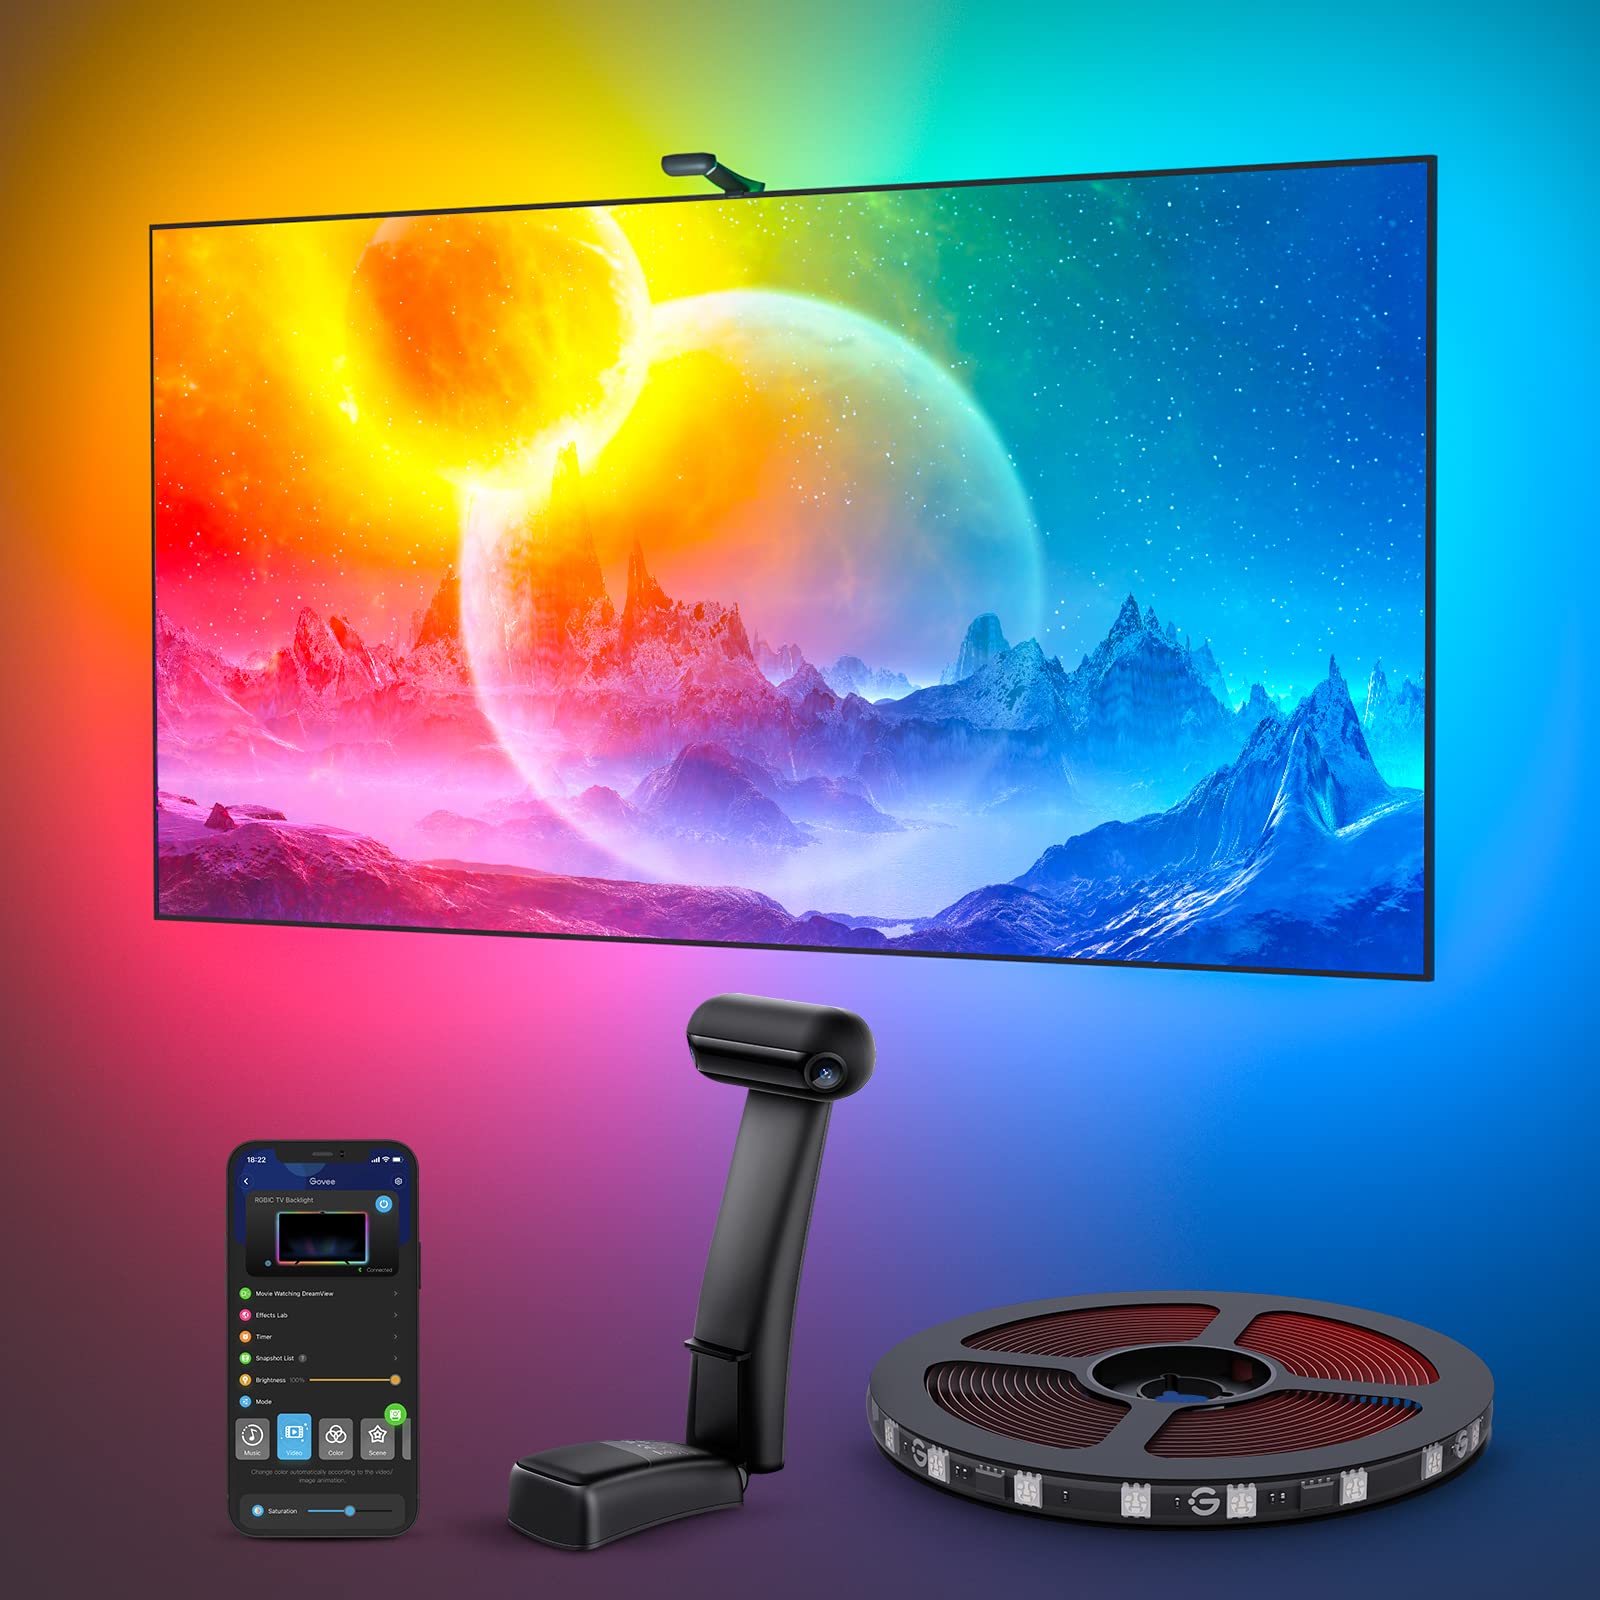 Govee Envisual 16.4ft TV Backlights T2 with Dual Cameras for 75-85 inch TVs，Bundle Music Sync Box Bluetooth Group Control 7 Goove Devices